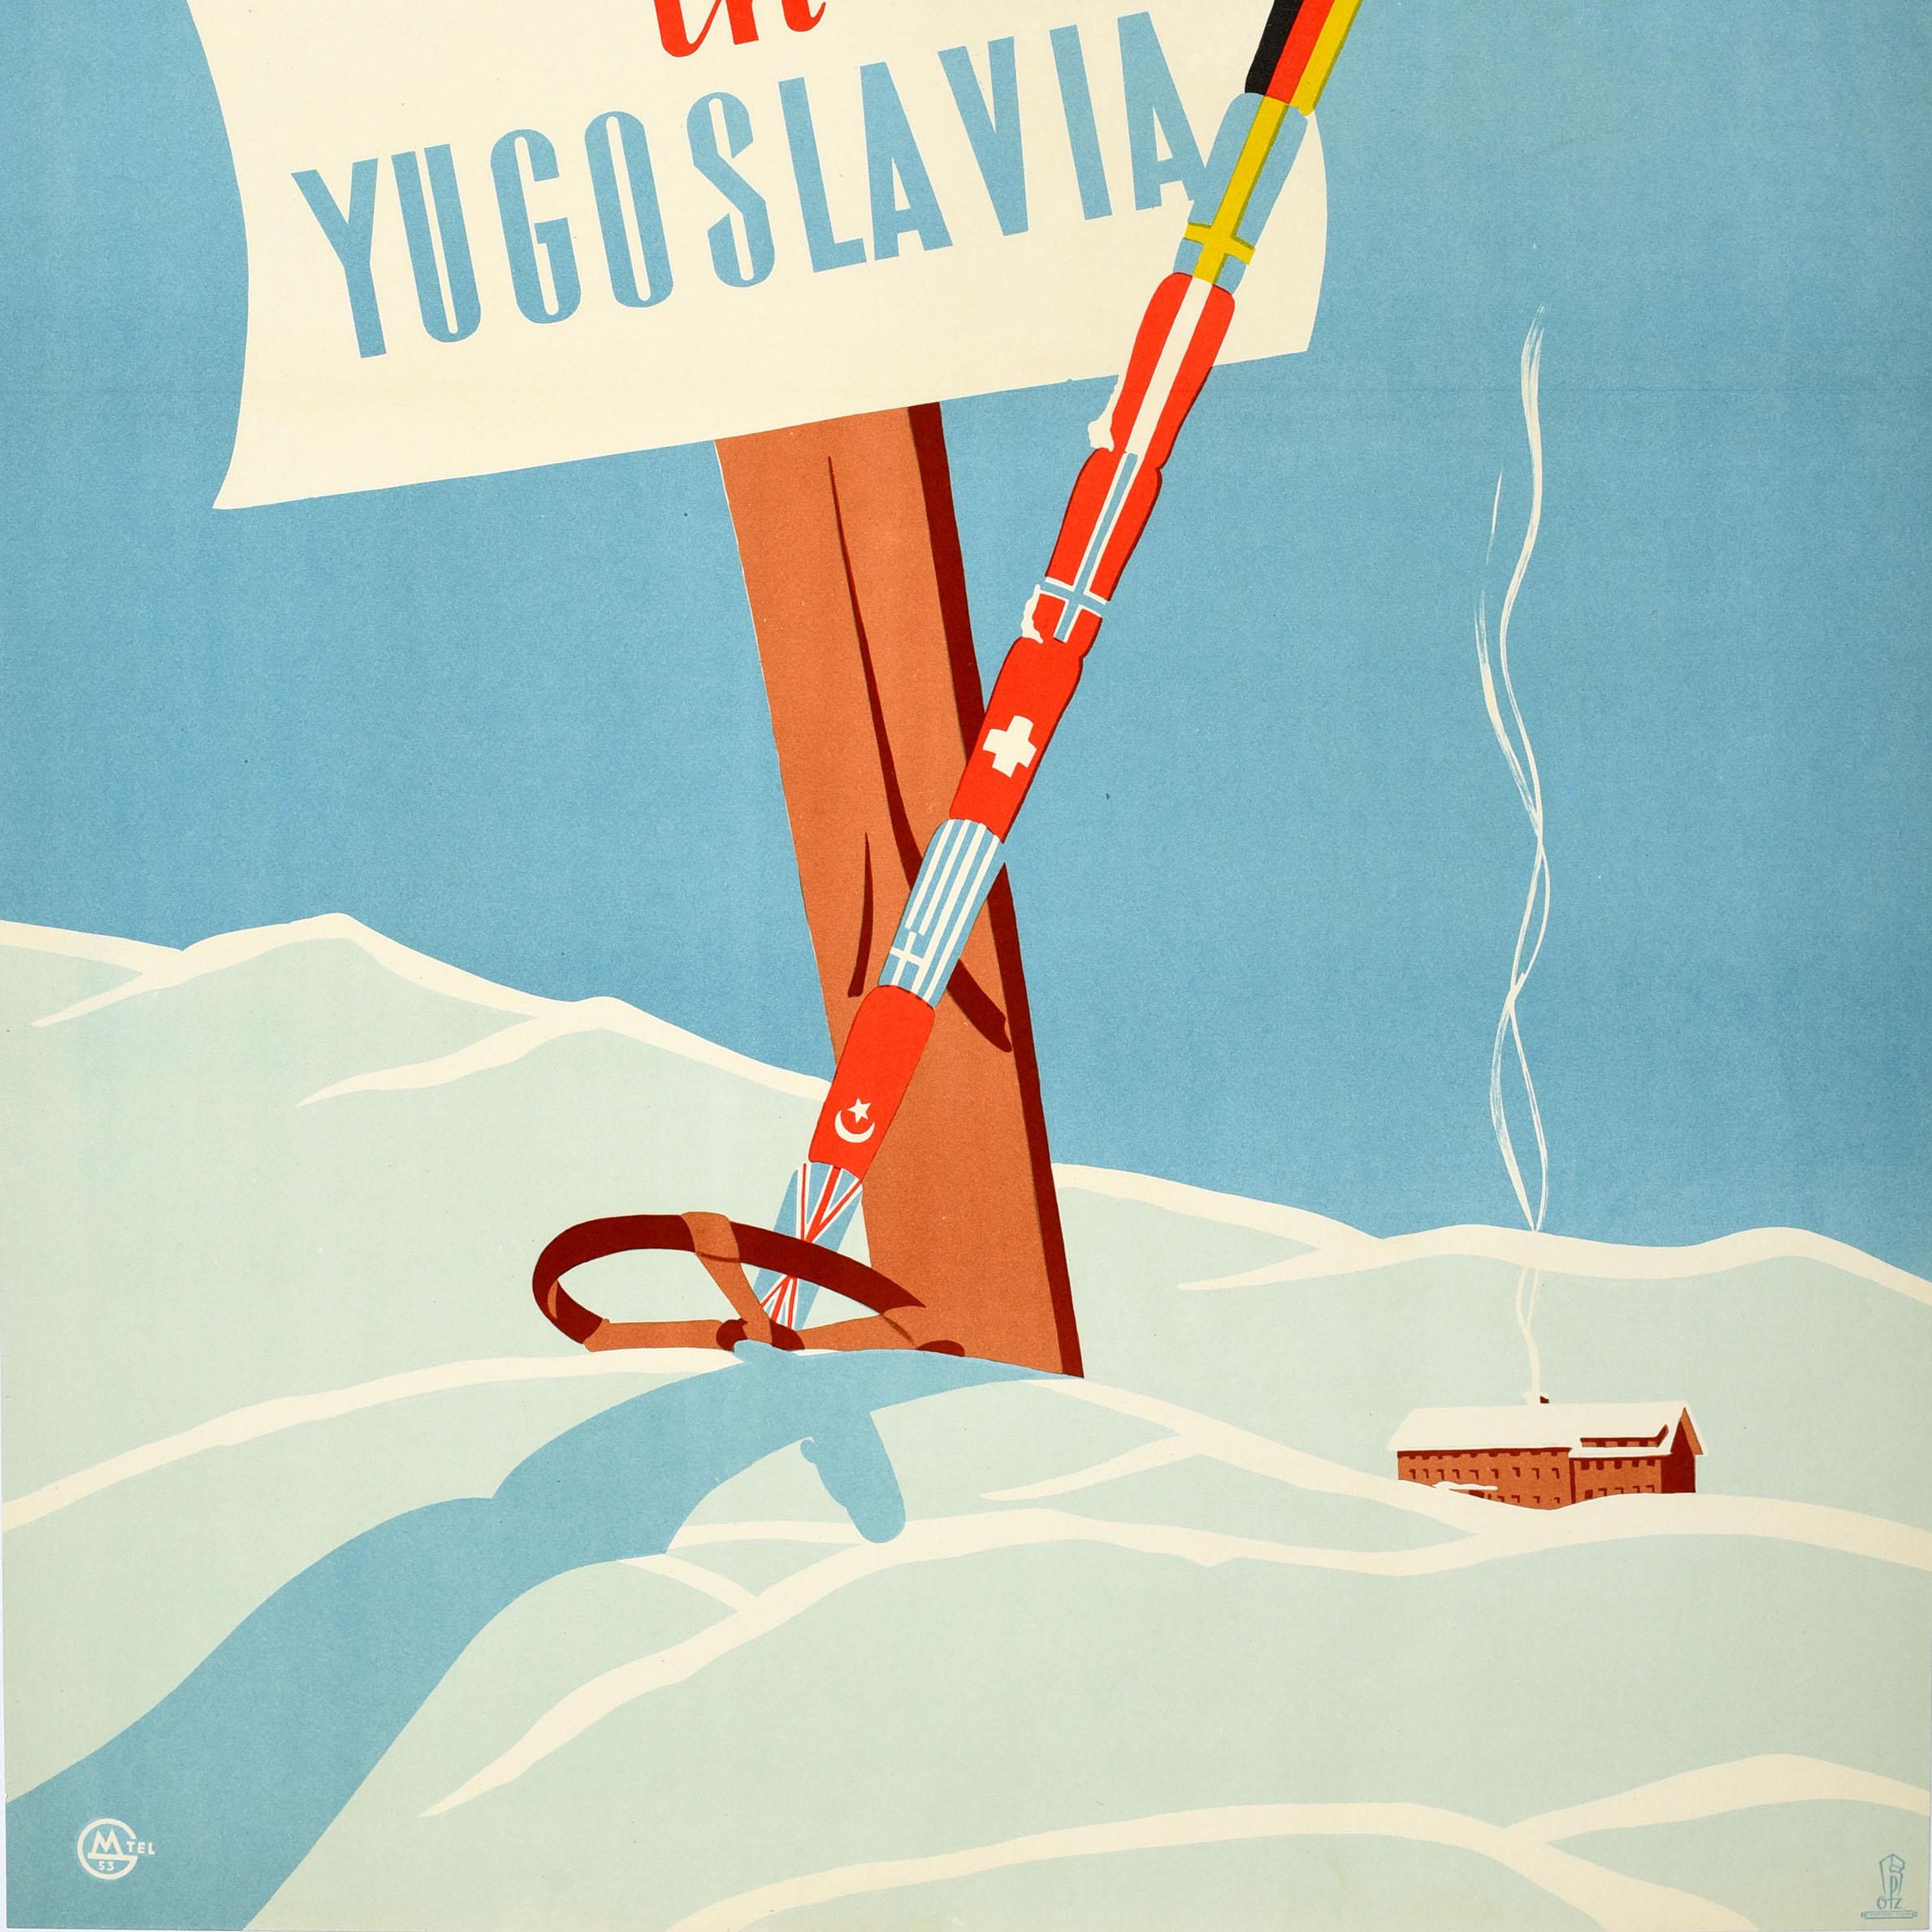 Original vintage skiing travel poster for Winter Sports in Yugoslavia - the title text on a sign hanging on a wooden ski next to a ski pole decorated with various national flags standing in the snow in the foreground, casting a shadow on the hill